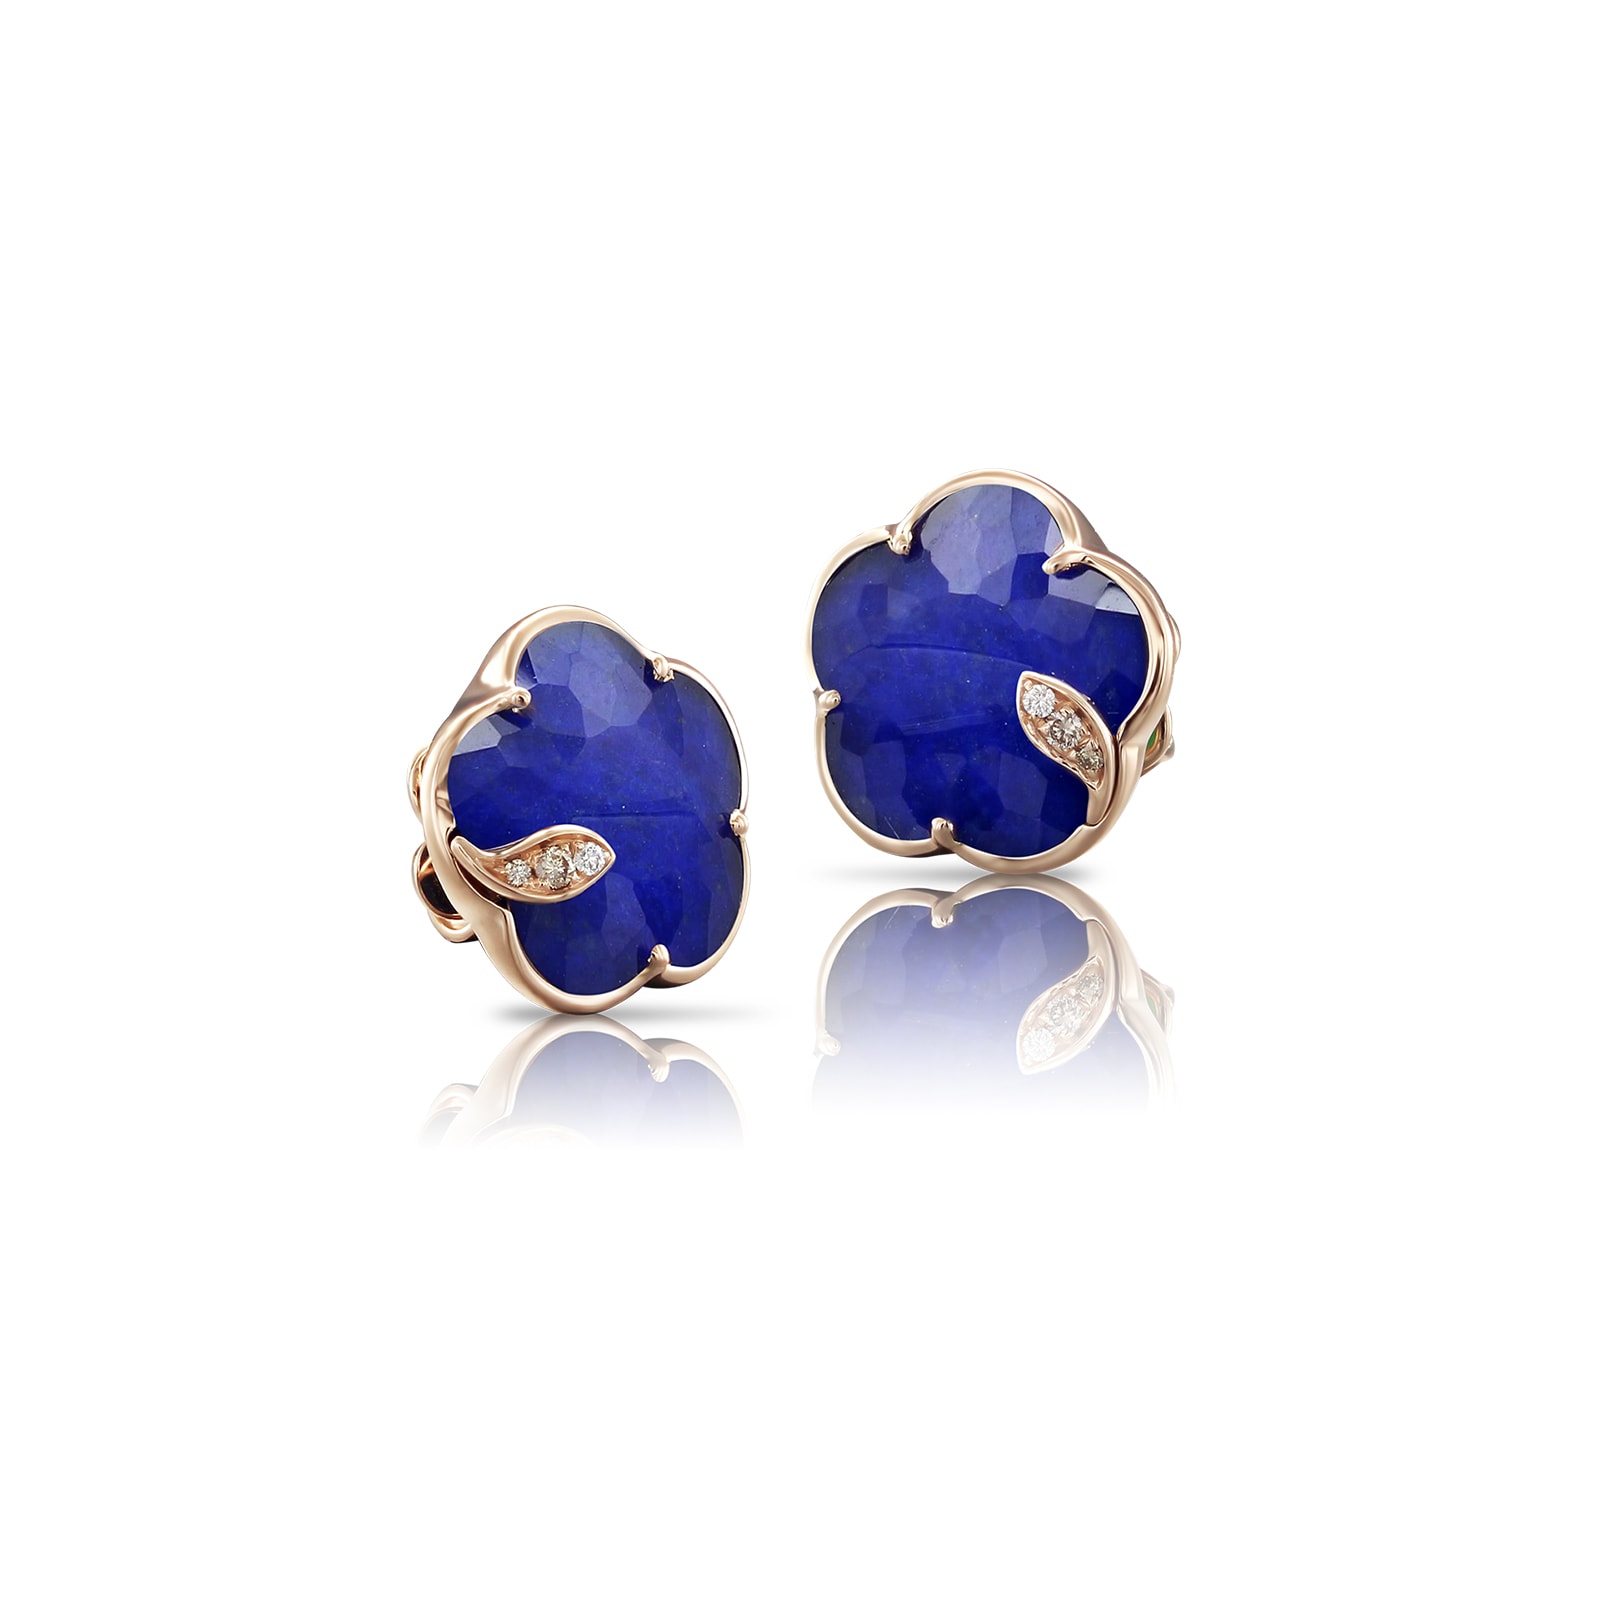 Petit Joli Earrings in18ct Rose Gold with Rock Crystal and Lapis Lazuli doublet and Diamonds